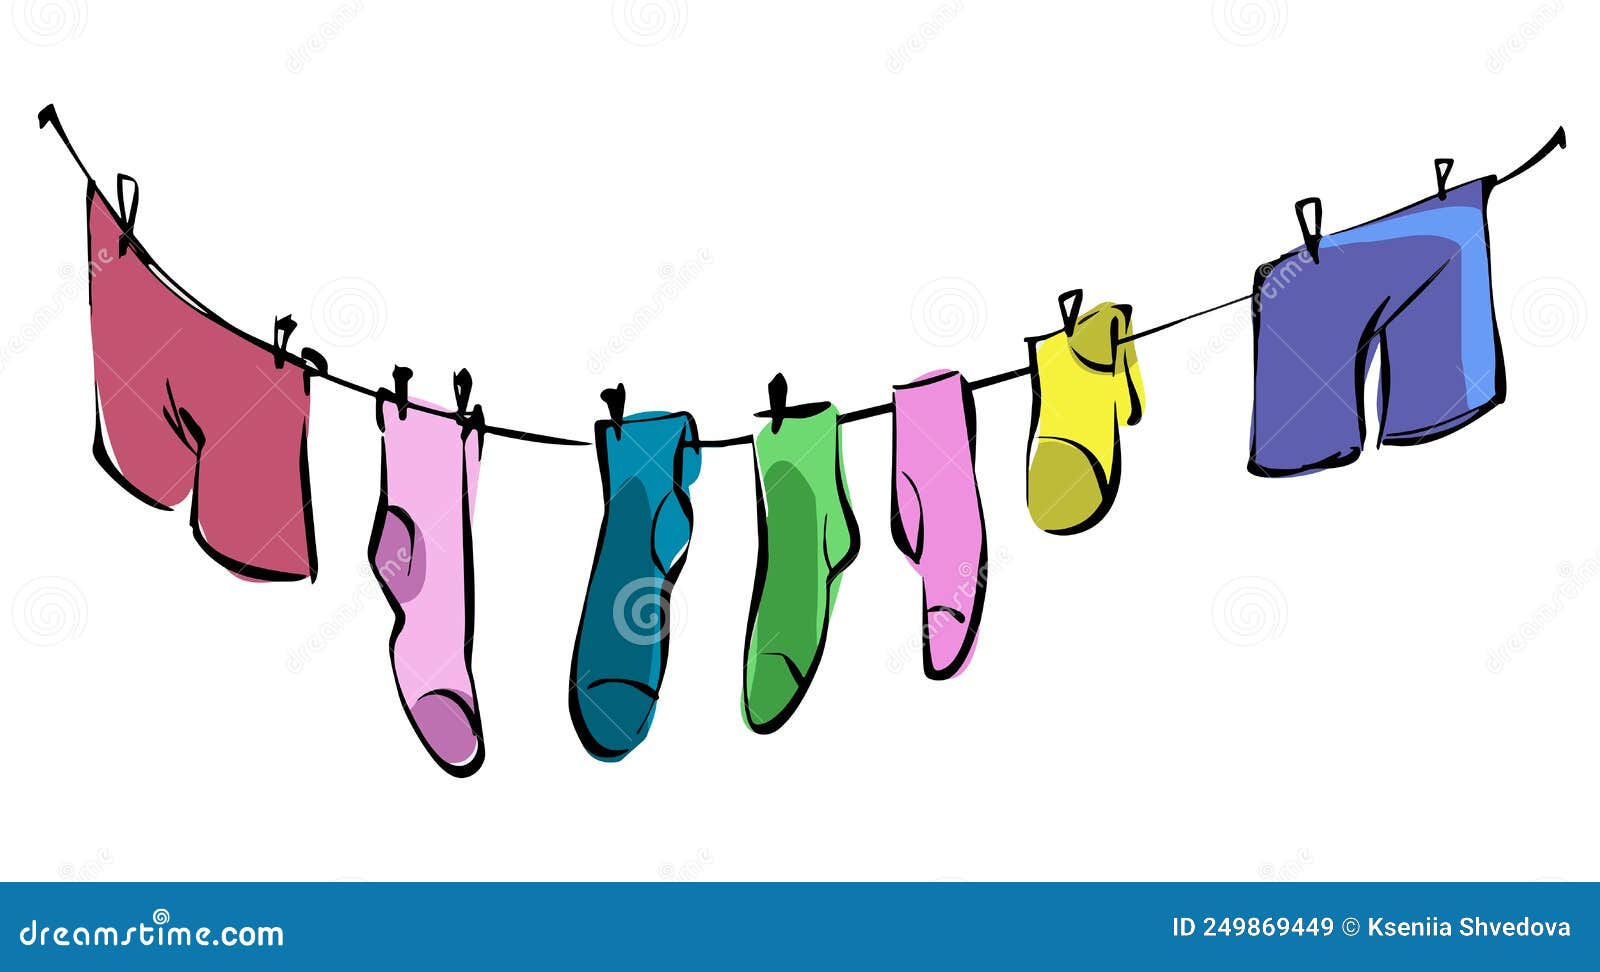 1,529 Panties Hanging On Line Images, Stock Photos, 3D objects, & Vectors